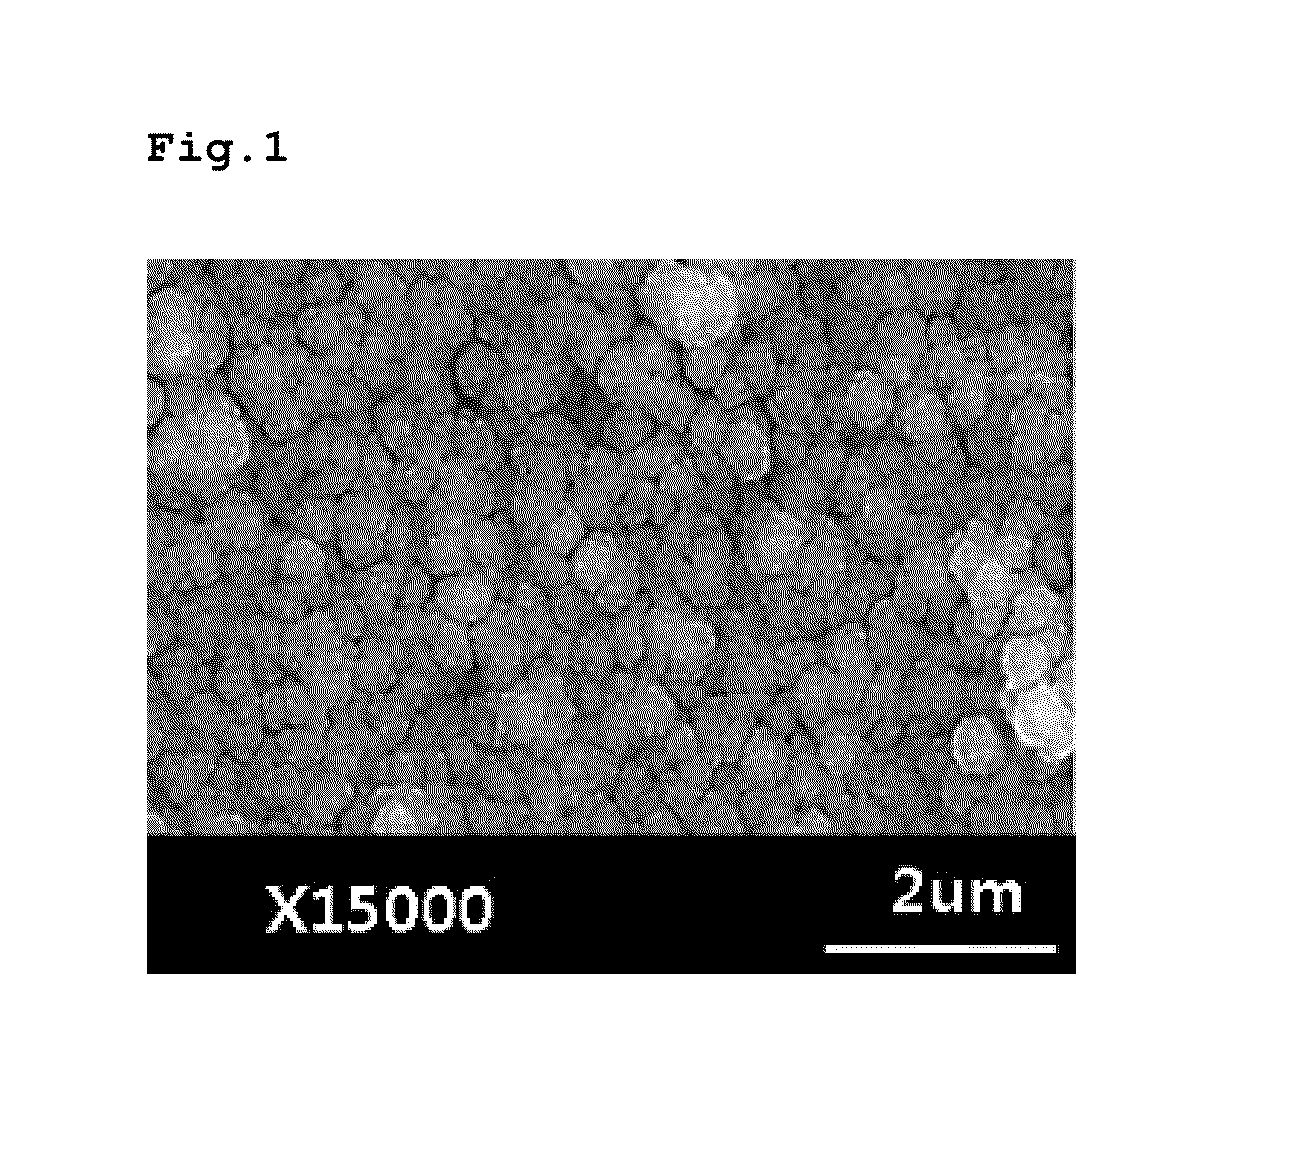 Zinc oxide-cellulose nanocomposite and preparation method thereof